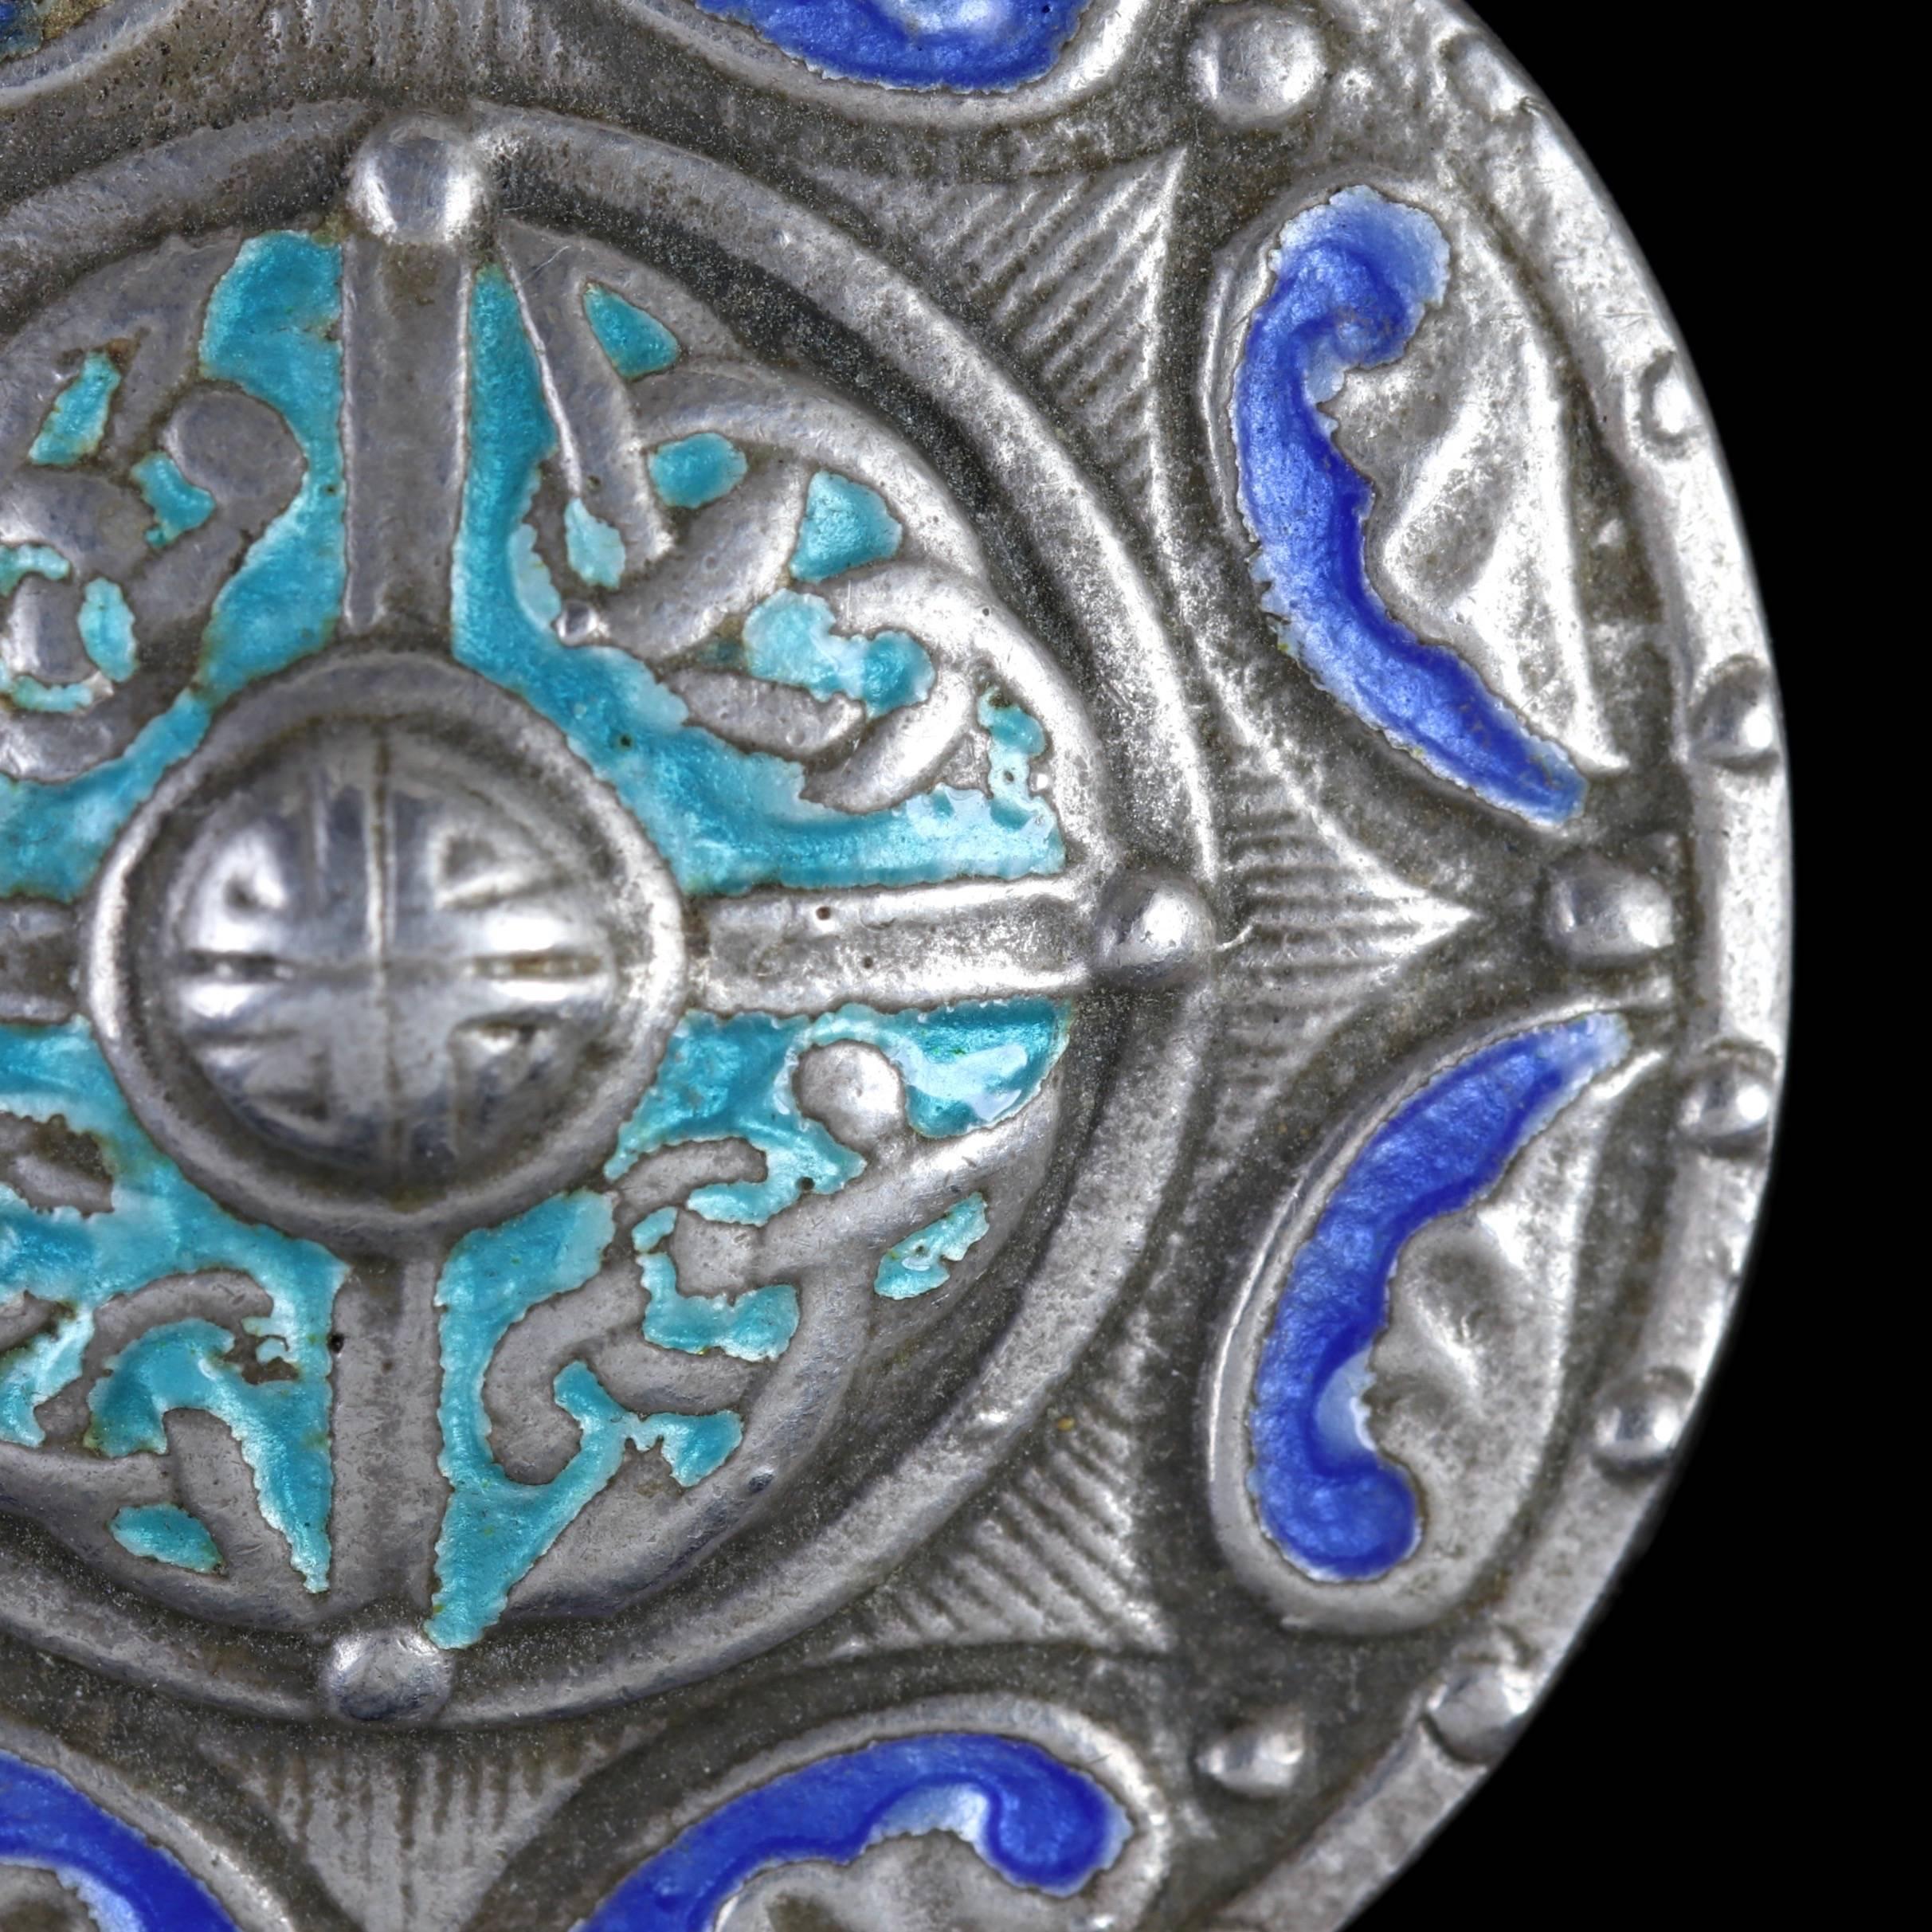 To read more please click continue reading below-

This beautiful antique Arts and Crafts Scottish shield brooch is genuine Victorian Circa 1900. 

The Arts and Crafts movement breathed new life into the design of jewellery in the late 19th century.